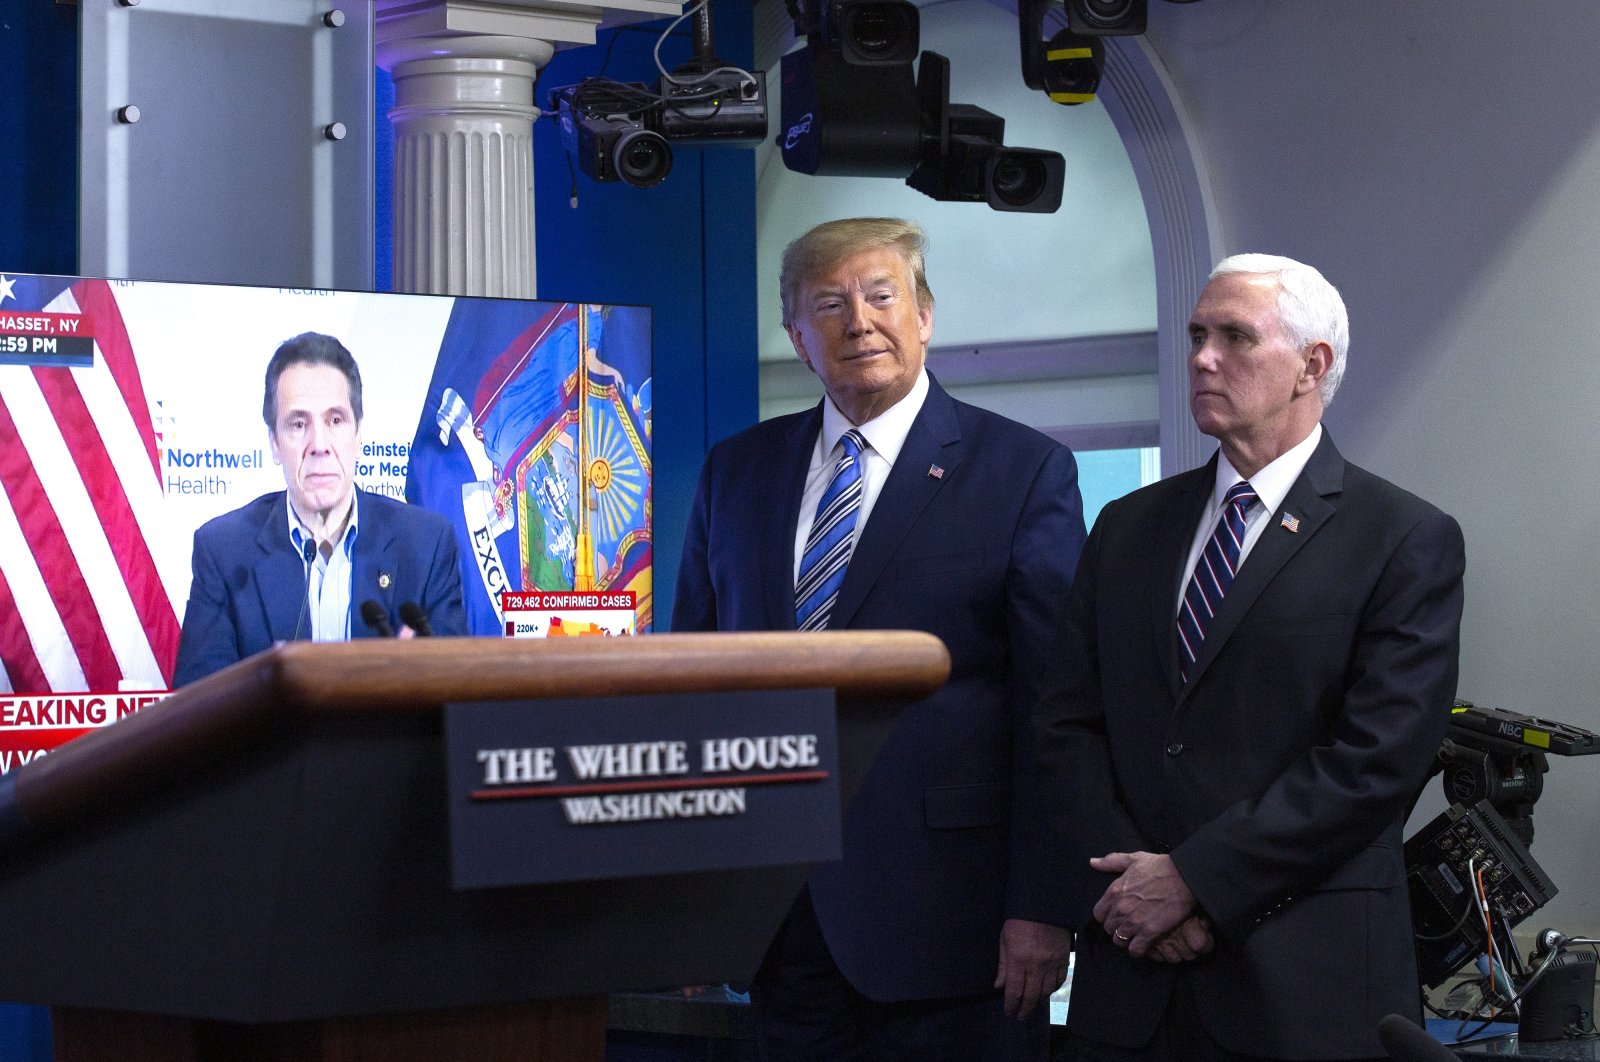 United States President Donald J. Trump (C), joined by United States Vice President Mike Pence (R), listen to a video of New York Governor Andrew Cuomo during a coronavirus task force news conference in the White House in Washington DC, USA, 19 April, 2020. (EPA Photo)